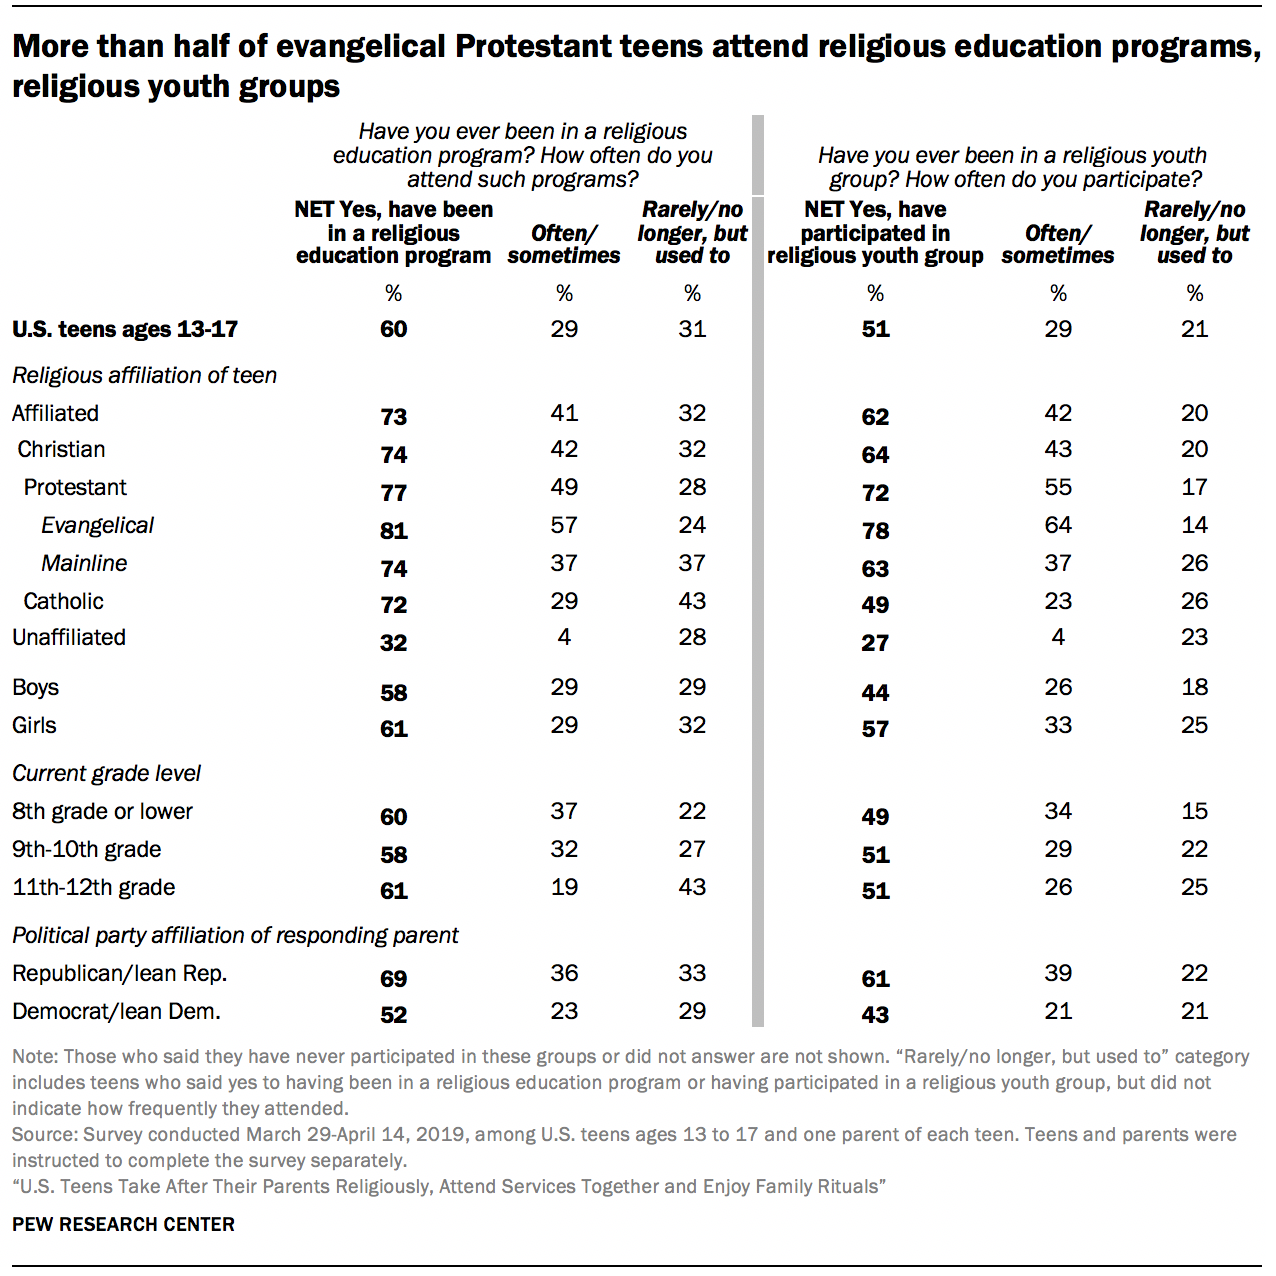 More than half of evangelical Protestant teens attend religious education programs, religious youth groups